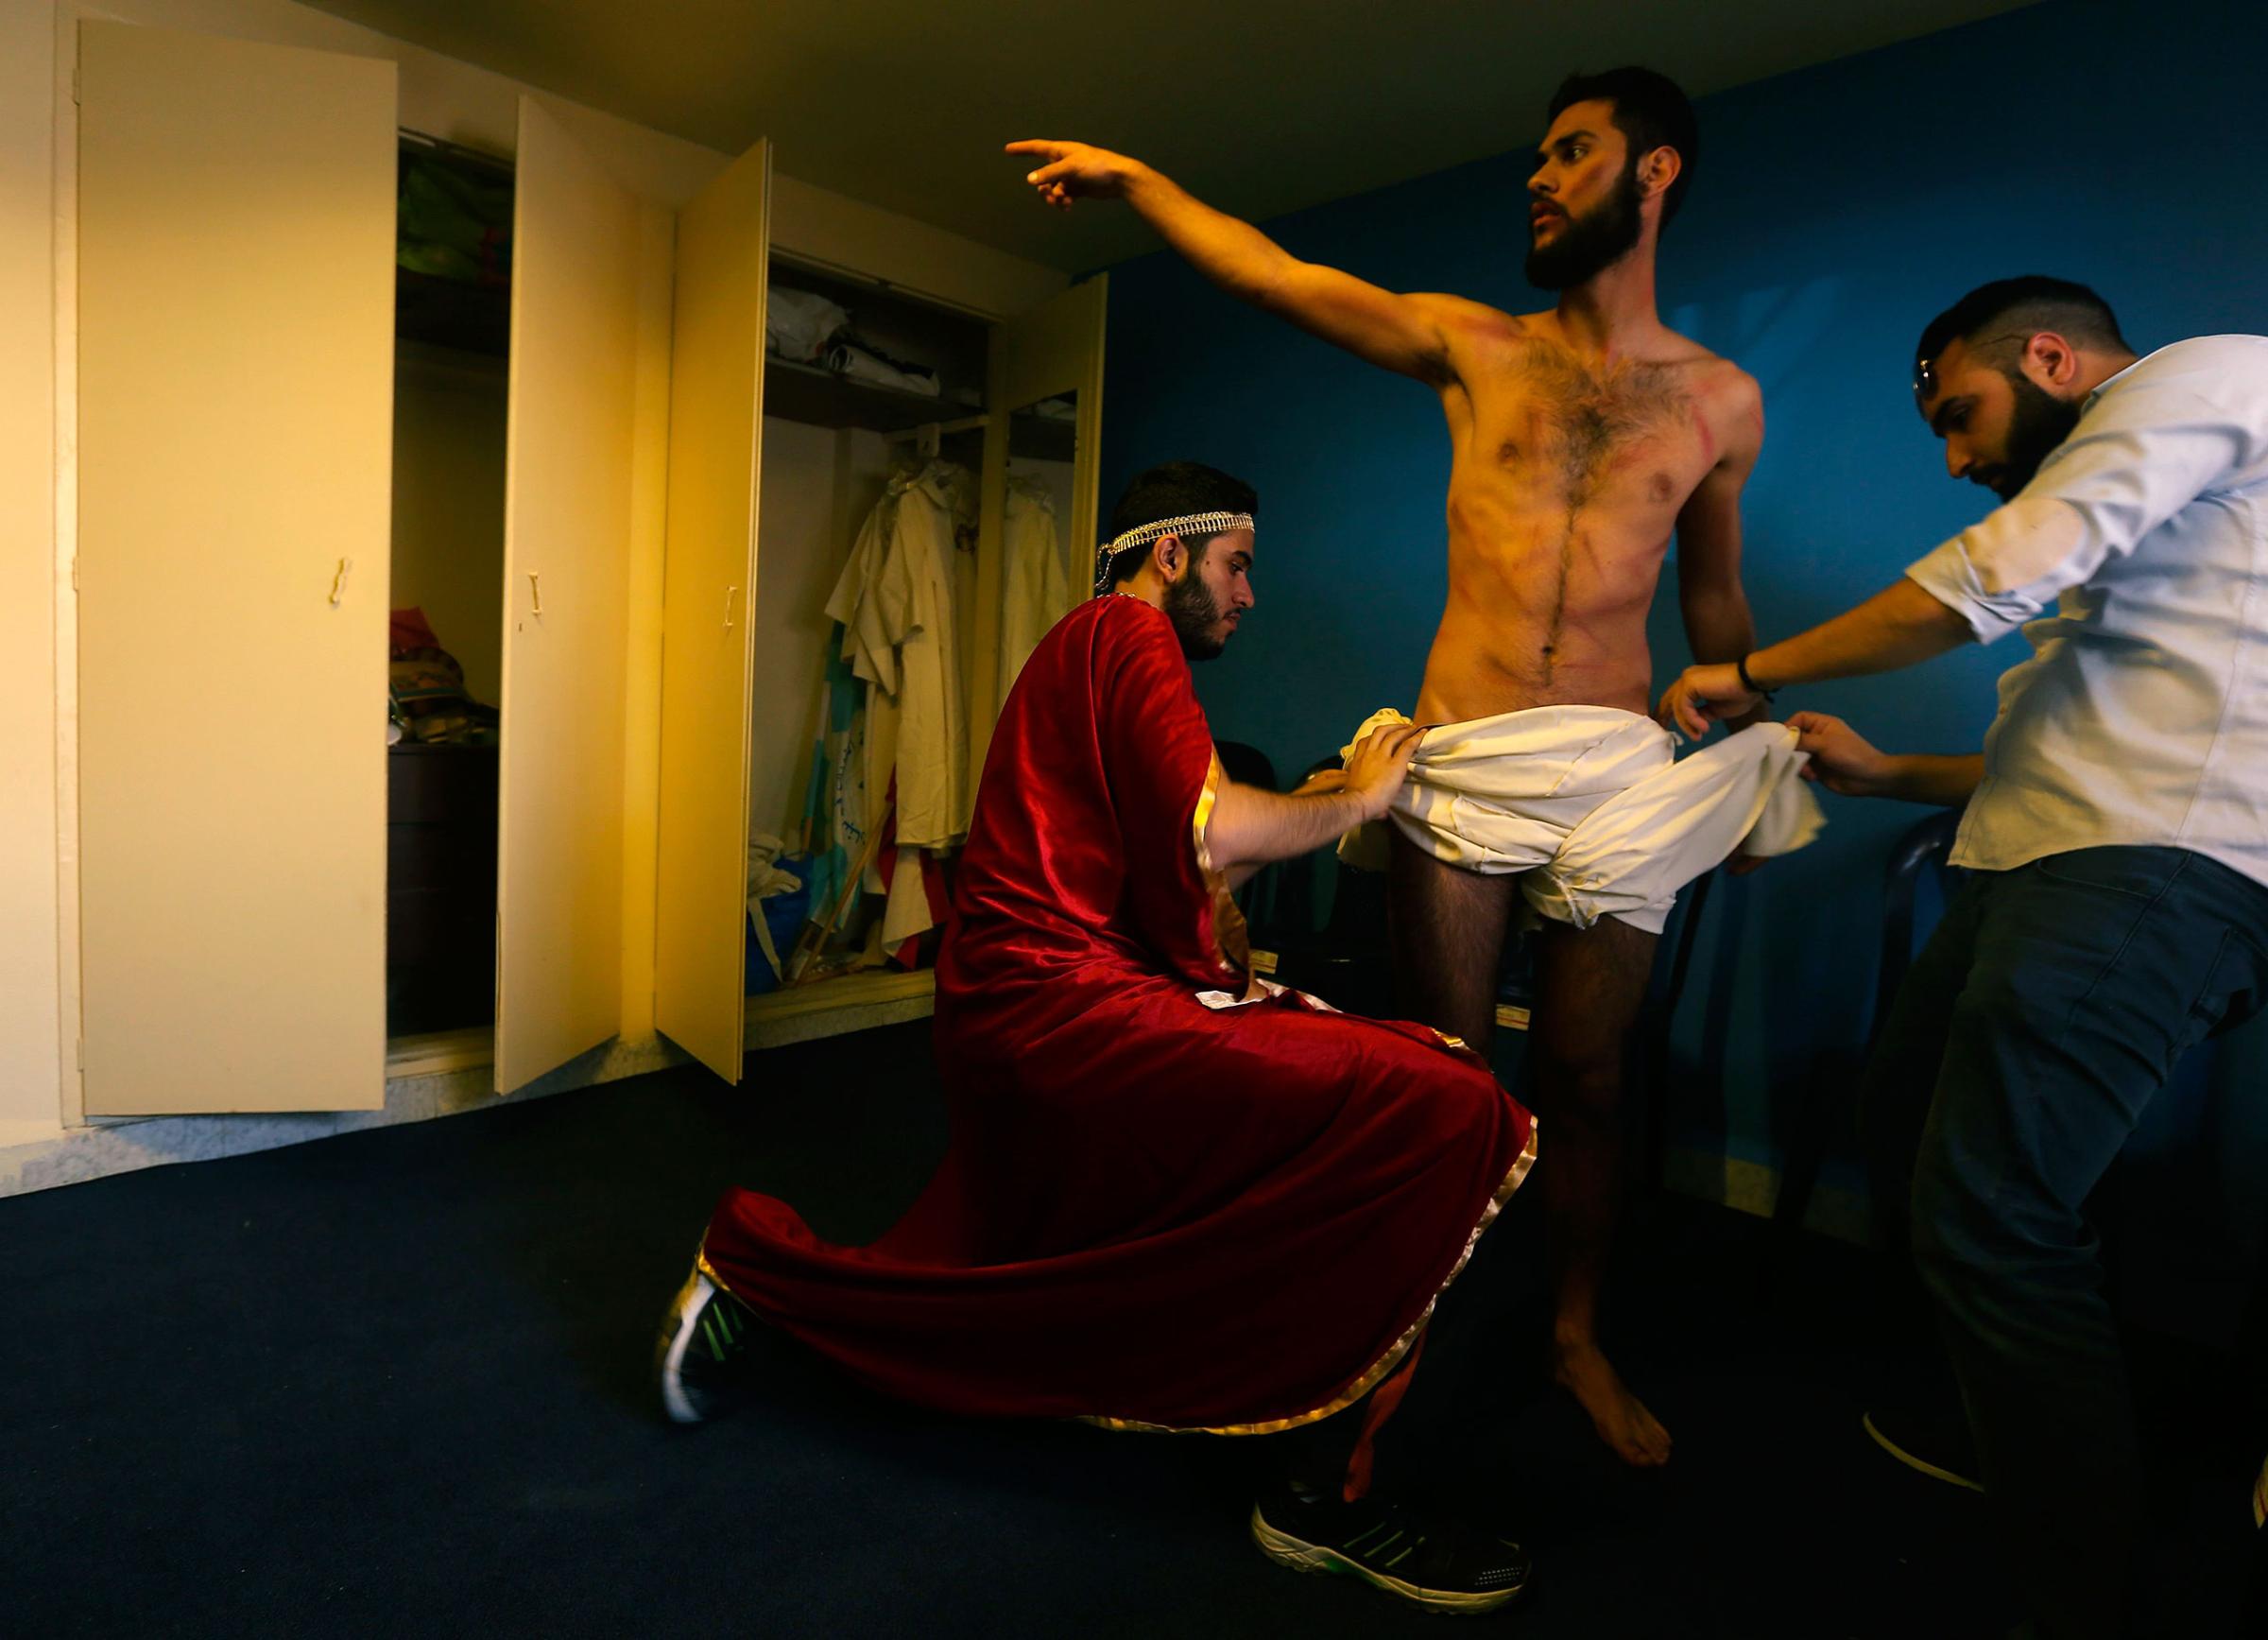 Lebanese Christians prepare the character playing Jesus as they reenact the crucifixion of Christ during Holy Friday in the Christian village of Qraiye, east of Sidon, Lebanon, March 25, 2016.